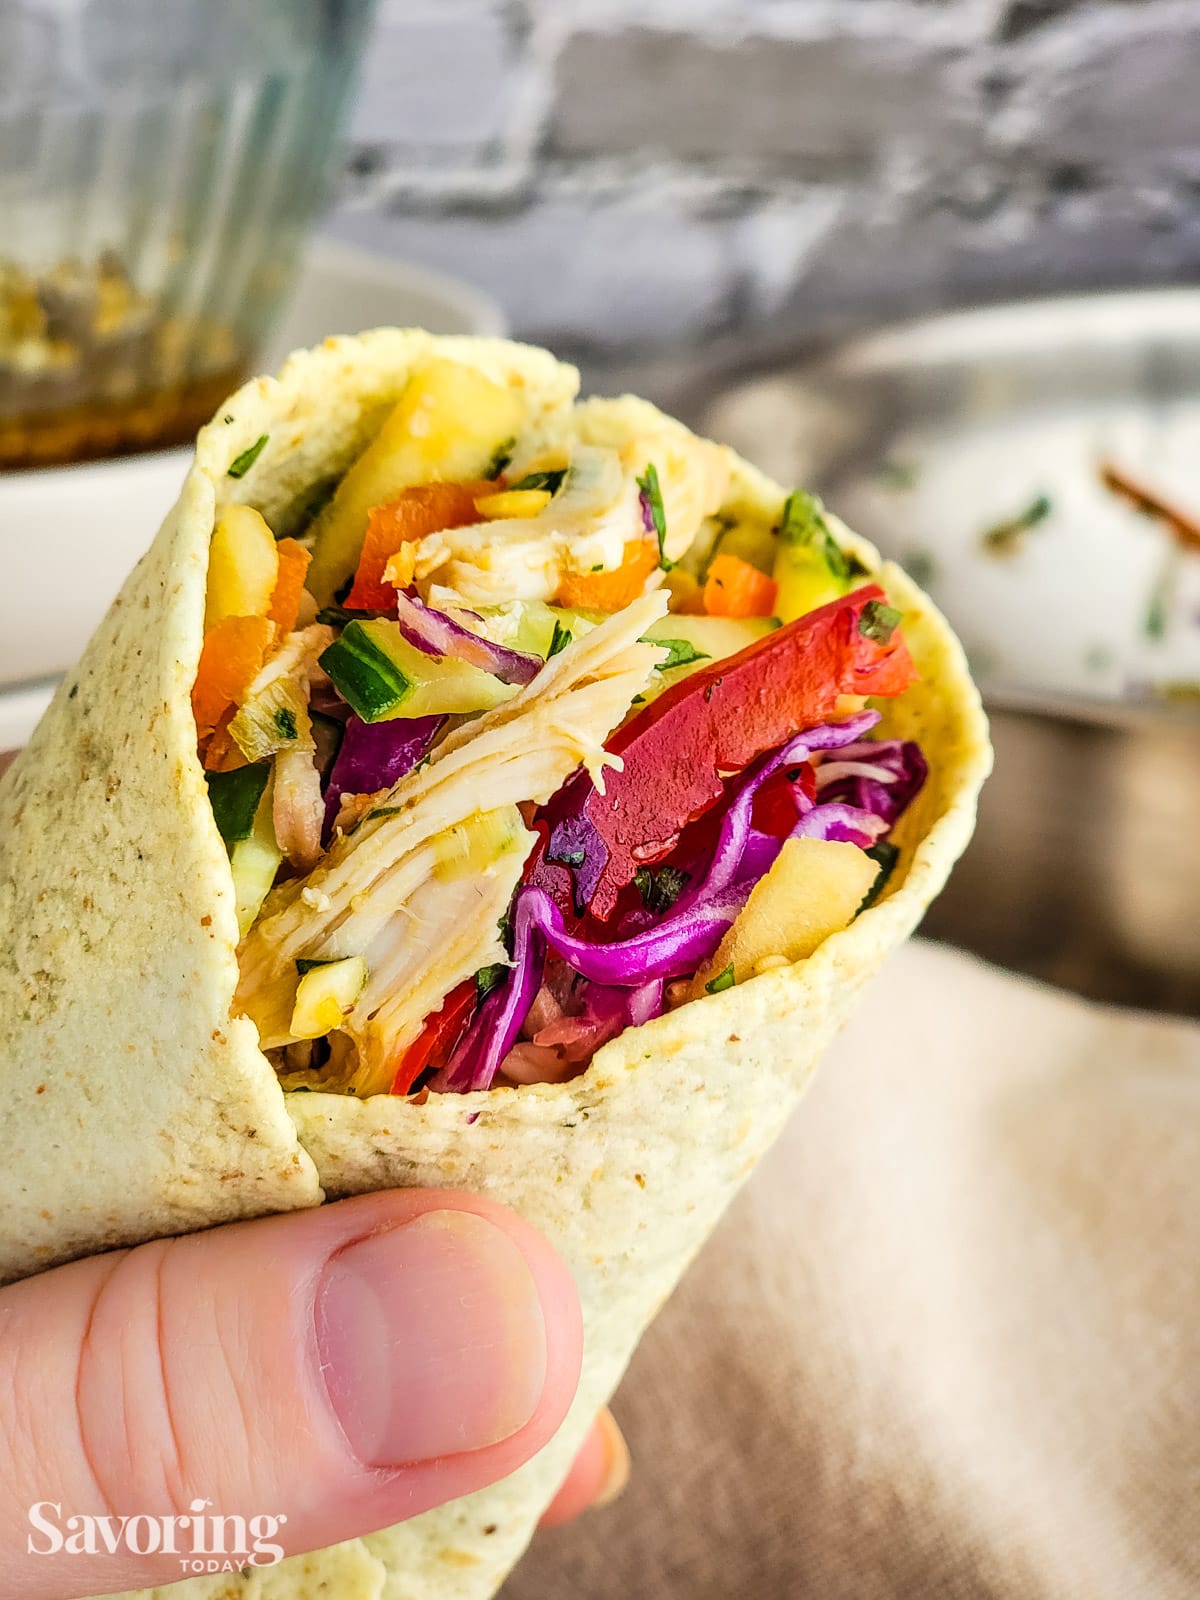 Chicken salad wrapped in a tortilla held in the hand